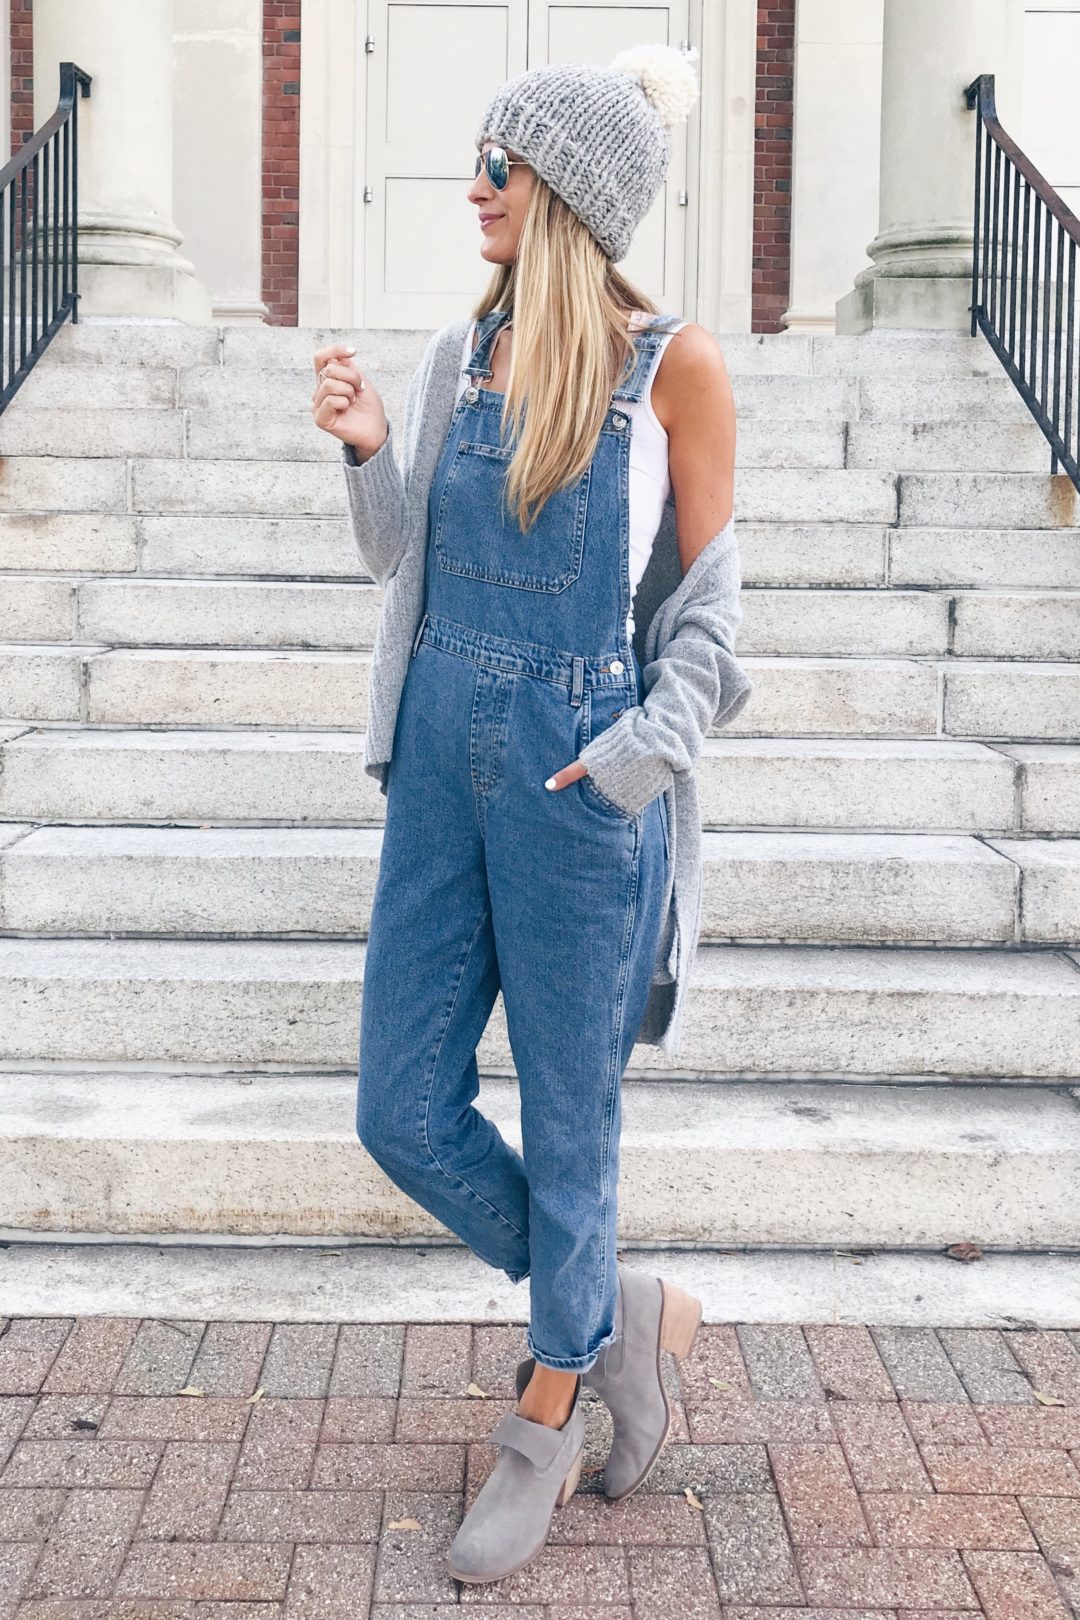 Fall fashion trends 2018 - overalls under a cardigan on pinteresting plans connecticut fashion blog